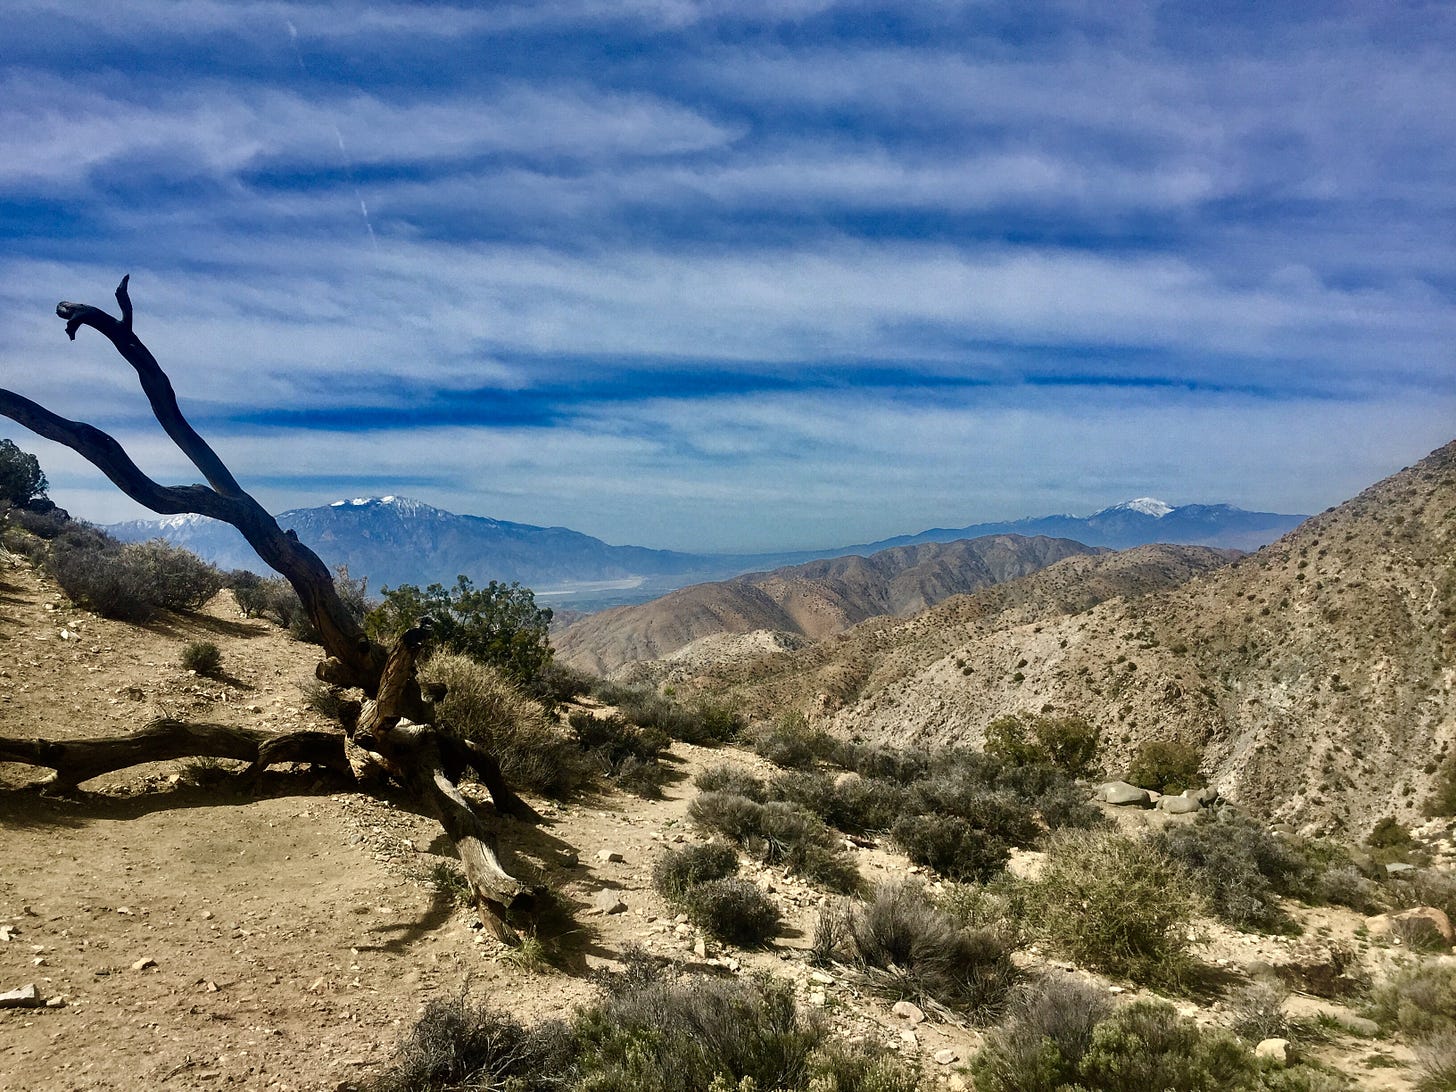 Two snow-covered mountains loom in the background against a cloudy sky. A desert hiking trail is in the foreground, with small creosote bushes and a dead tree limb in front.